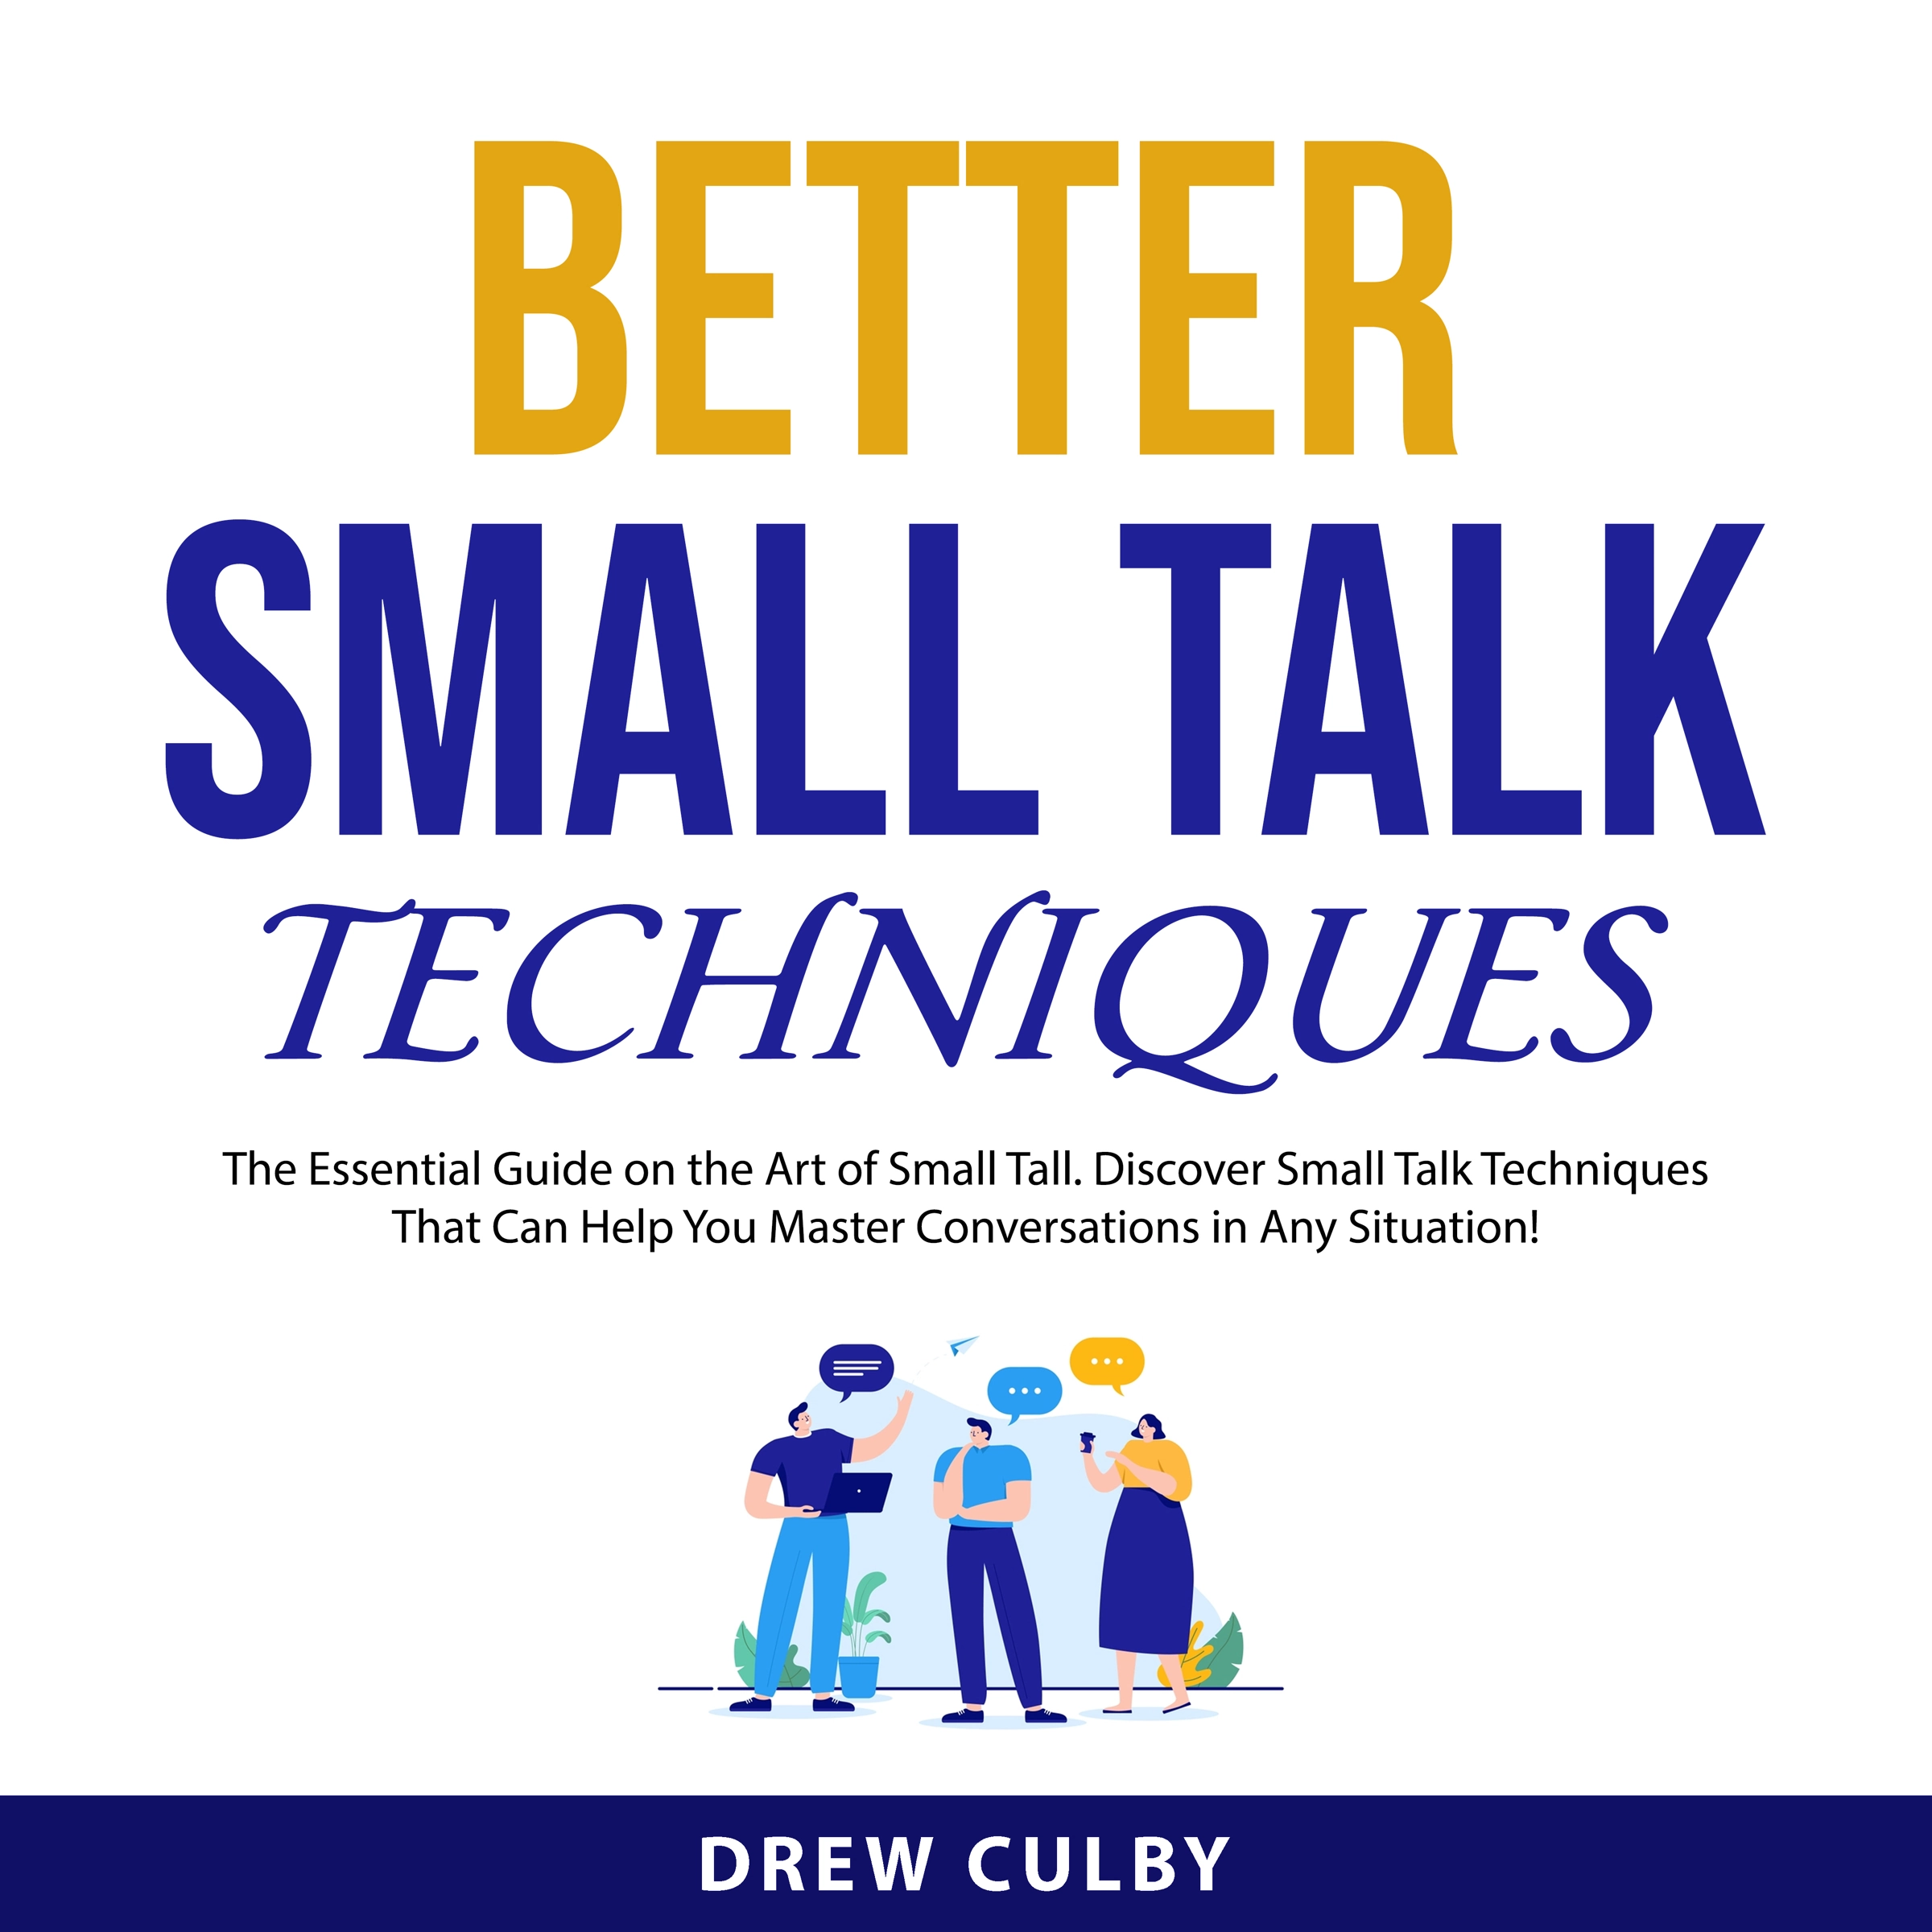 Better Small Talk Techniques Audiobook by Drew Culby